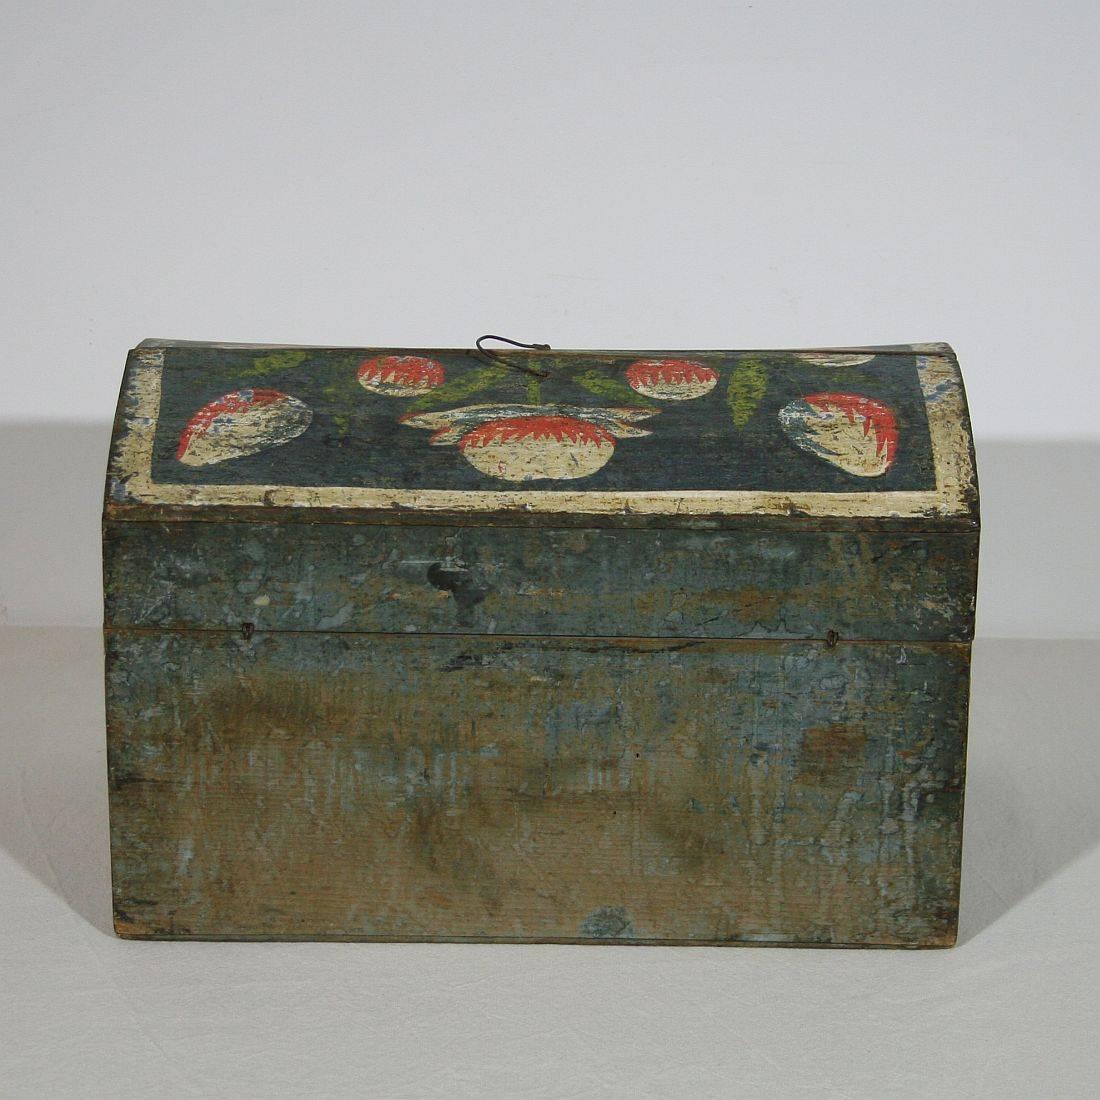 18th Century and Earlier 18th Century French Folk Art Weddingbox from Normandy